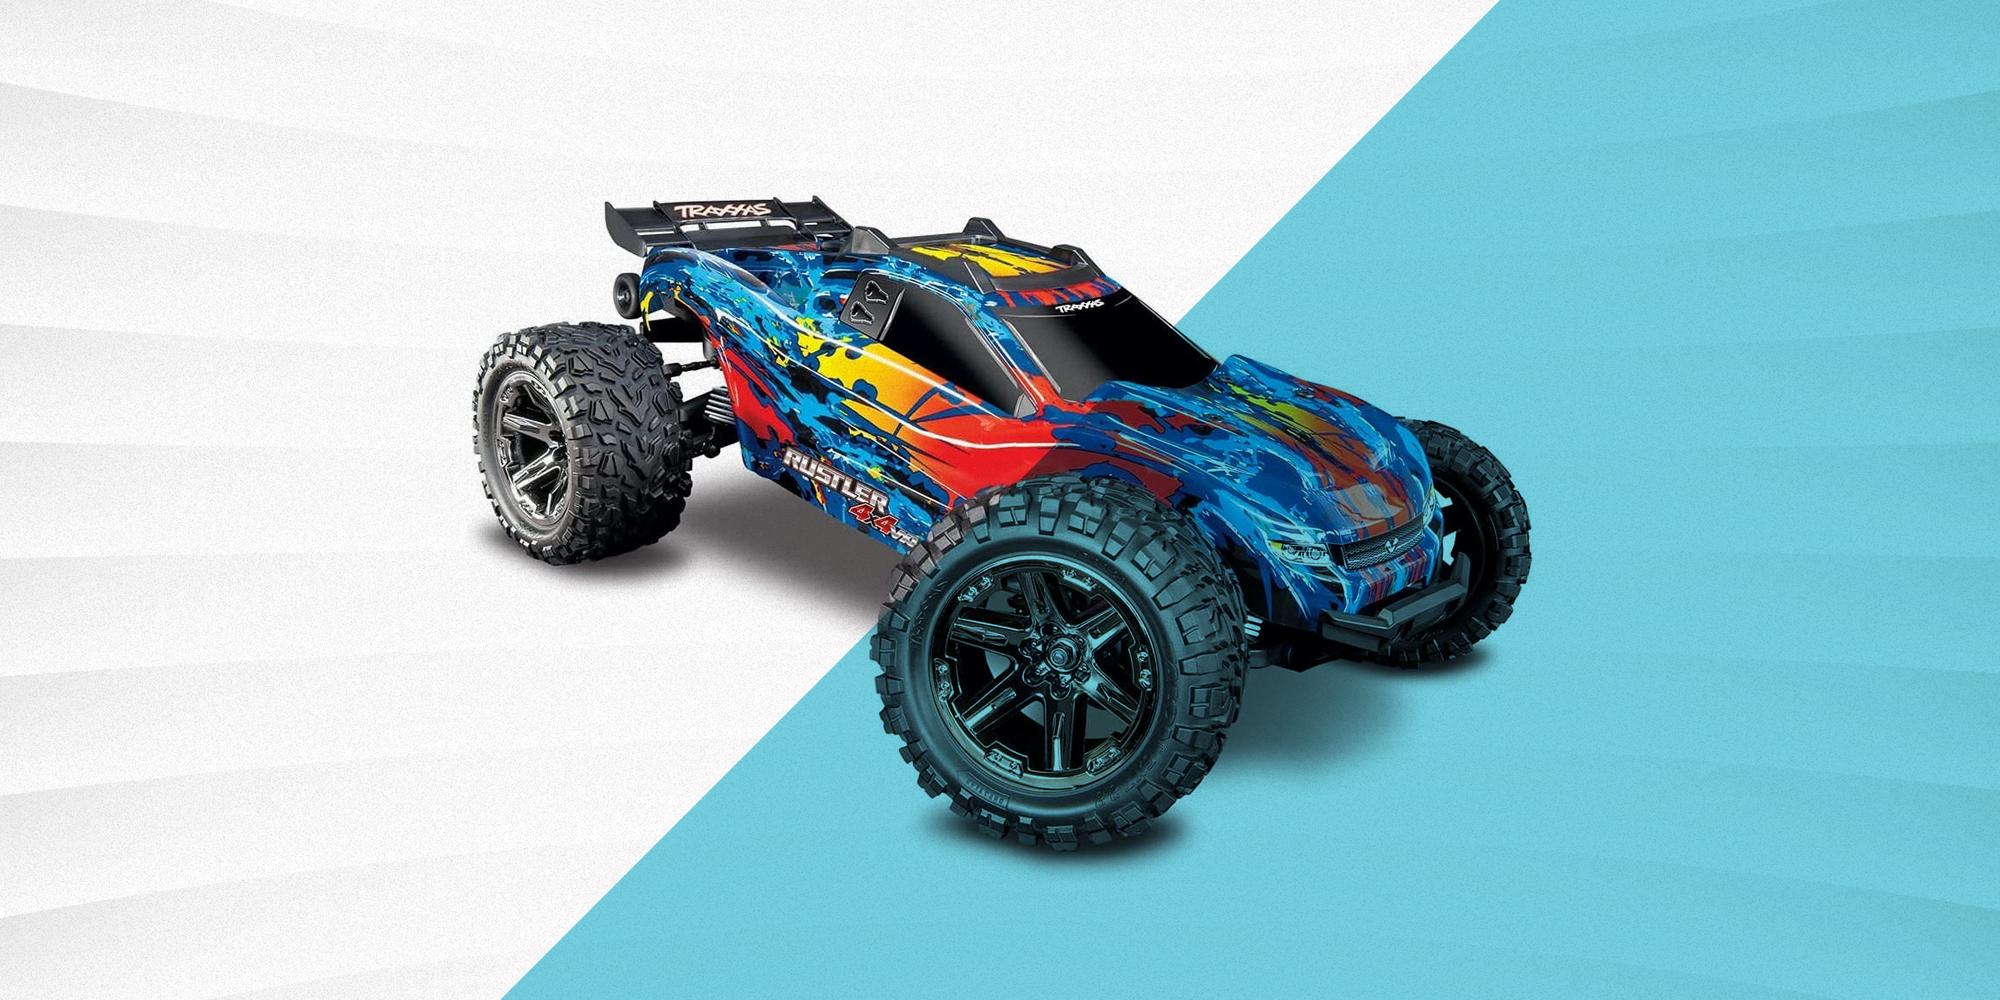 Cheap Rc Cars That Go Fast: Top Affordable and High-Speed RC Cars on the Market